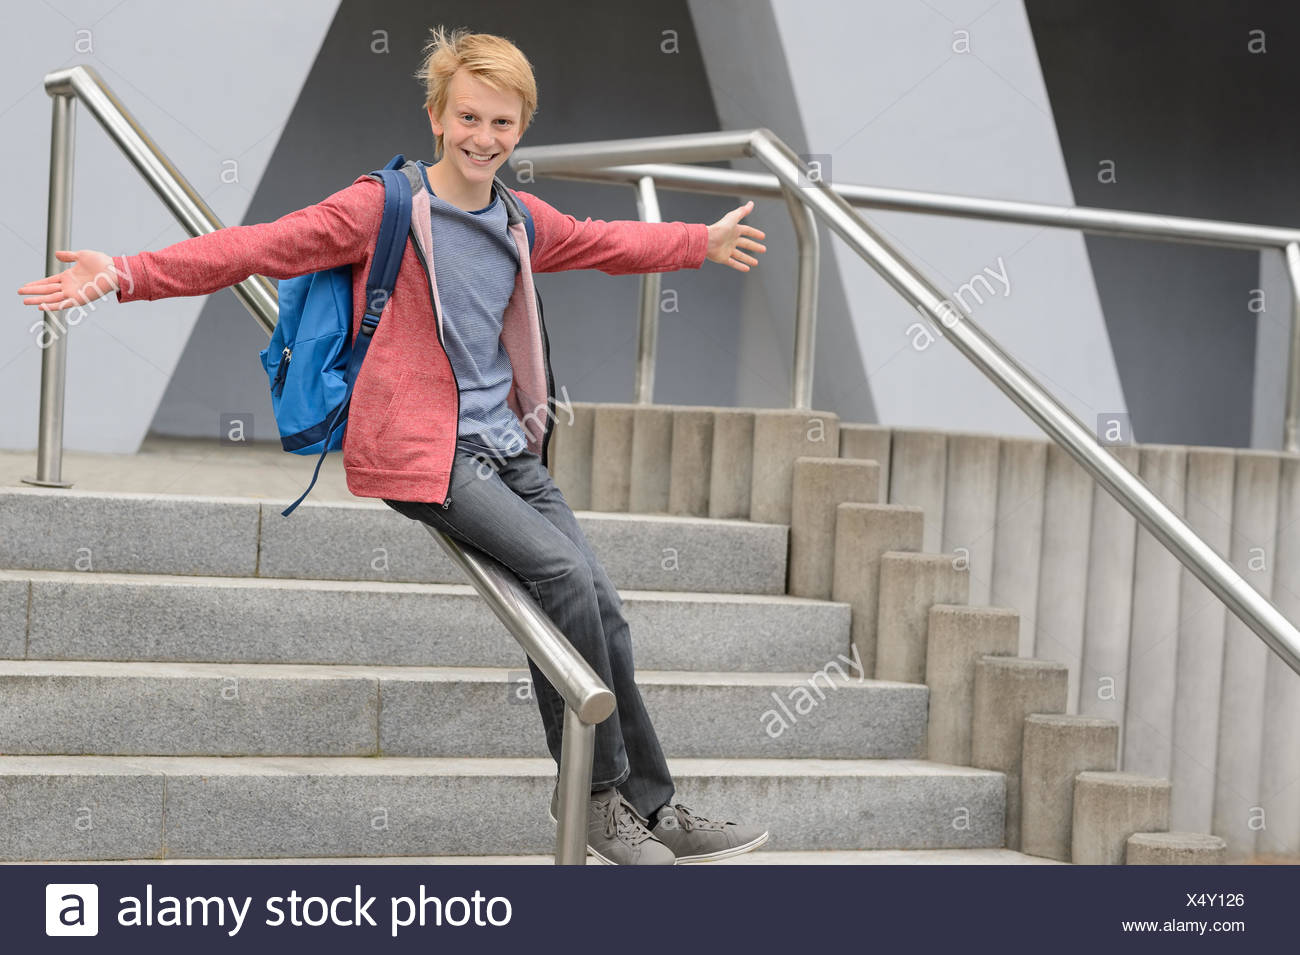 28 Best Images Sliding Down The Banister : Sliding Down Bannister High Resolution Stock Photography And Images Alamy